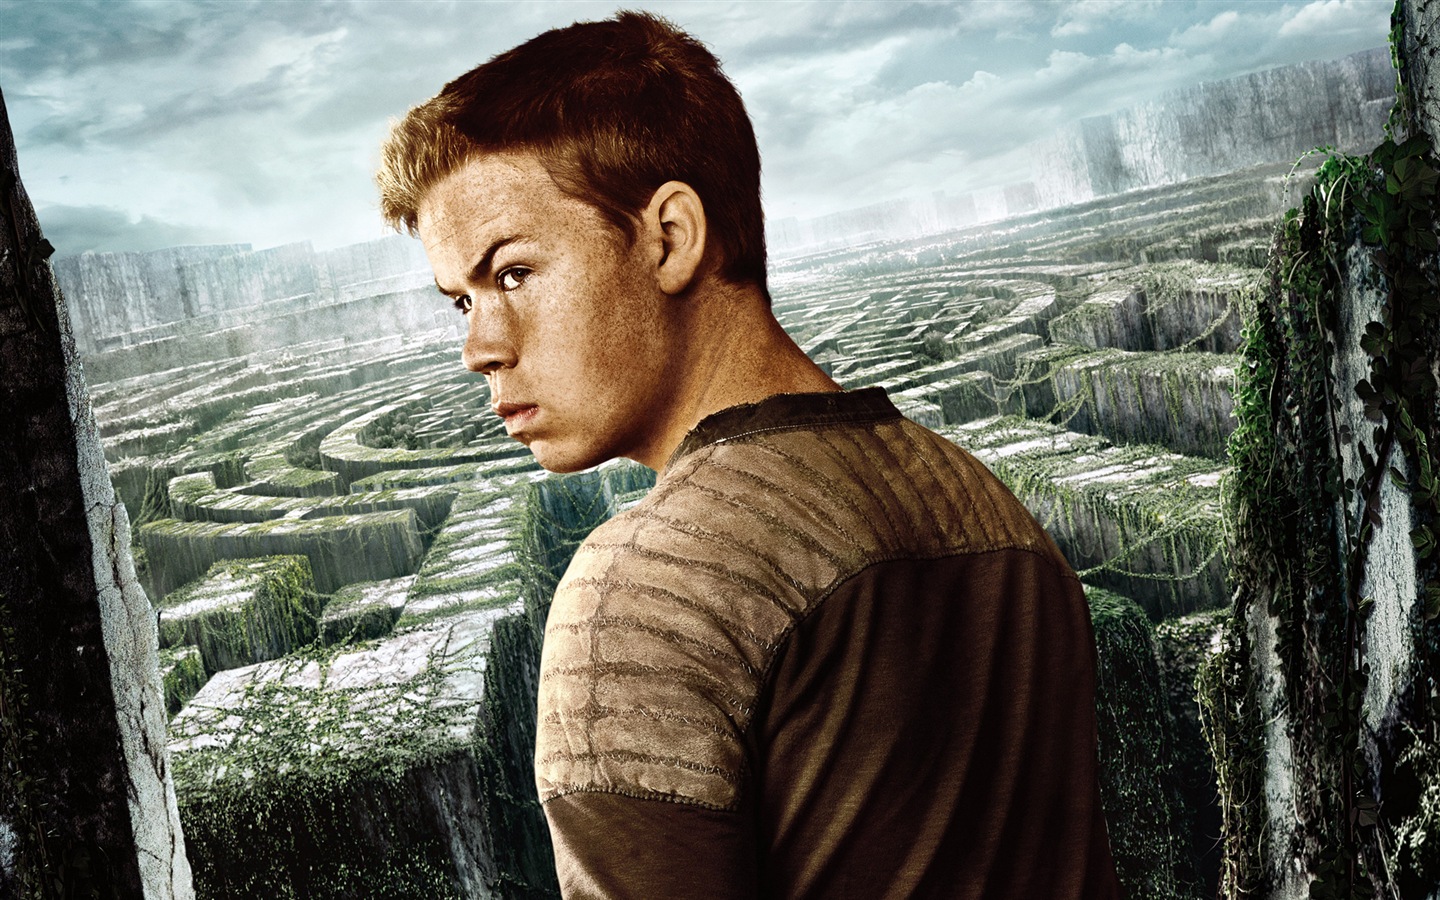 The Maze Runner HD movie wallpapers #11 - 1440x900